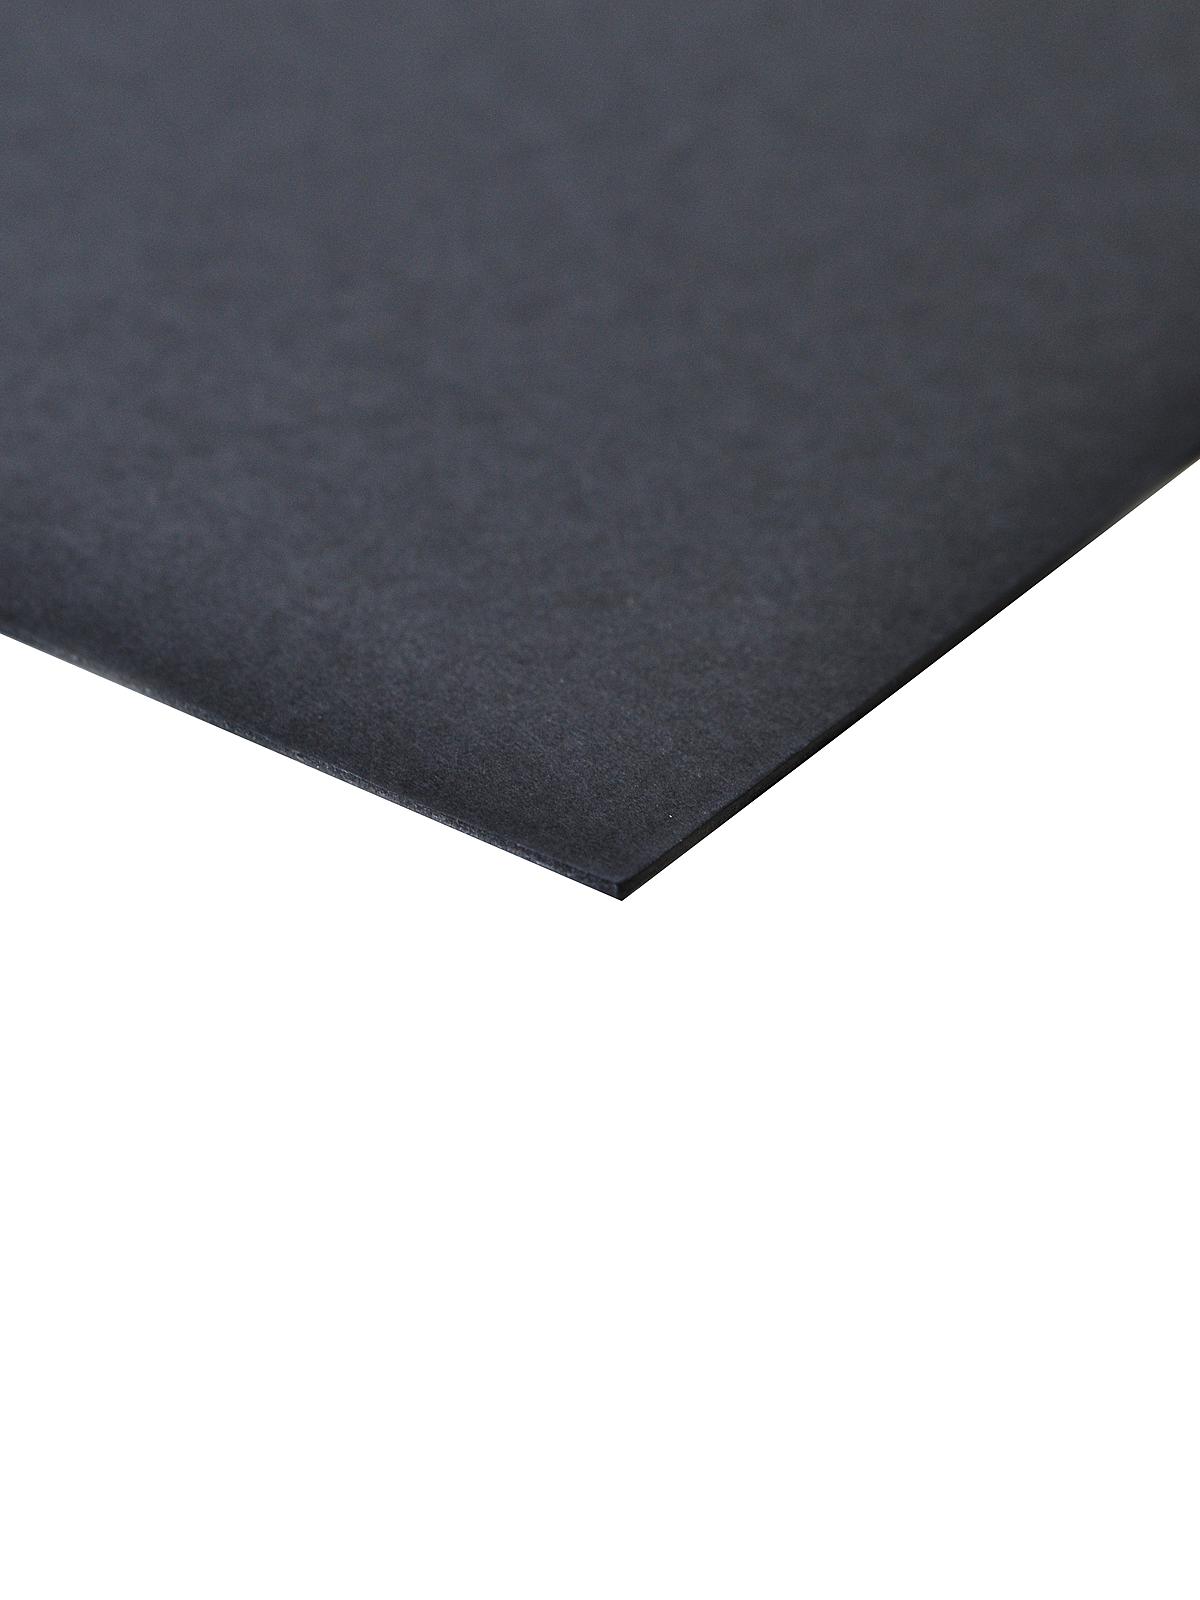 No. 100st Super Black Mounting Board 20 In. X 30 In. Each